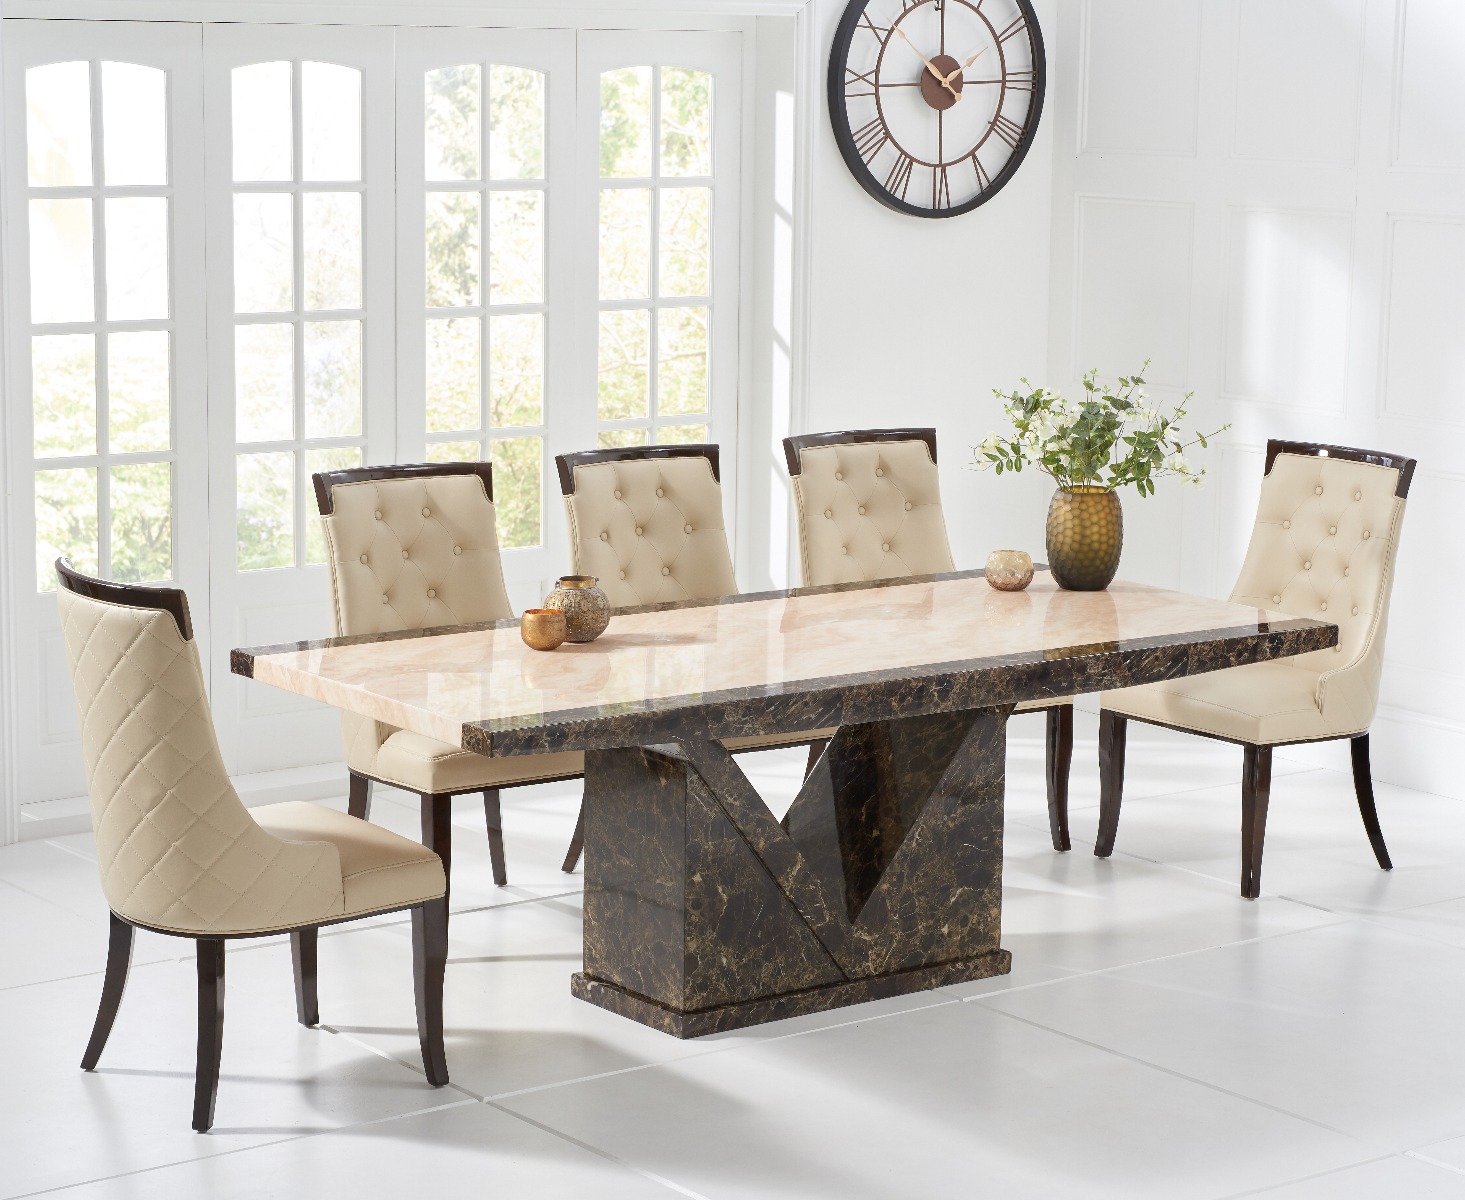 Tenore 220cm Marble Effect Dining Table With 6 Cream Francesca Chairs